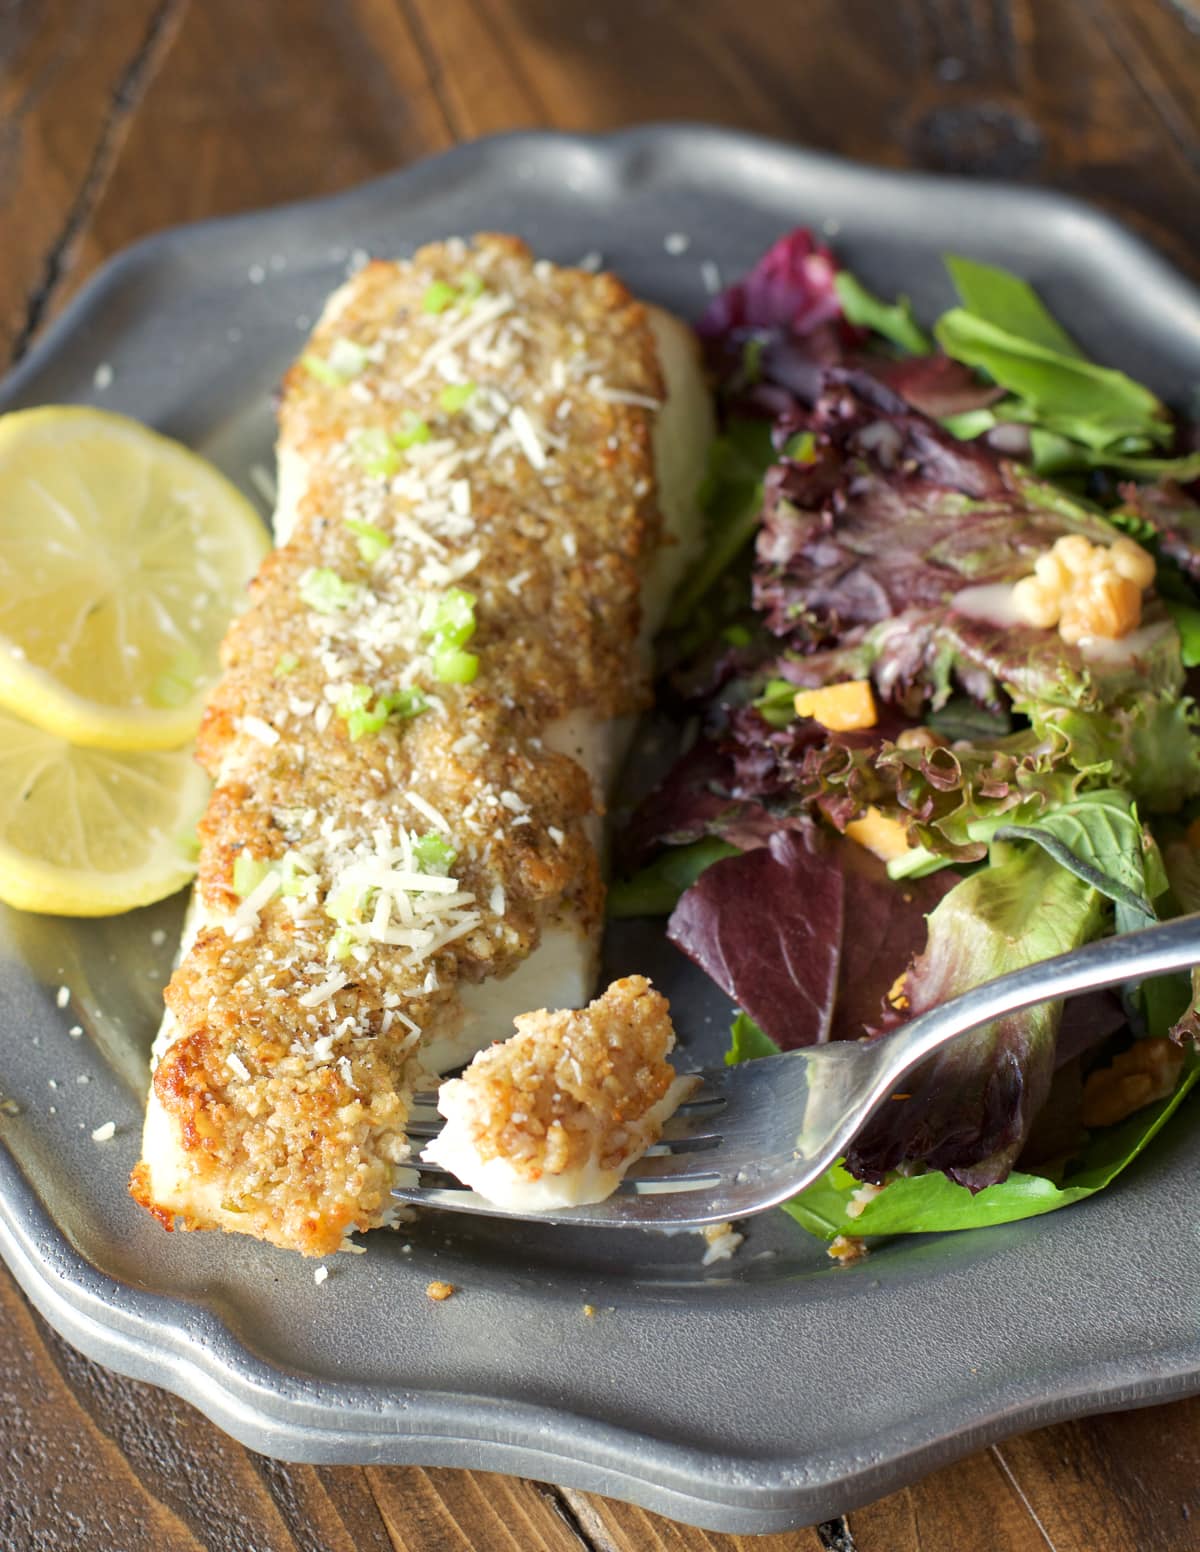 Pecan and Parmesan crusted halibut fillet on a dark plate with a side salad. 